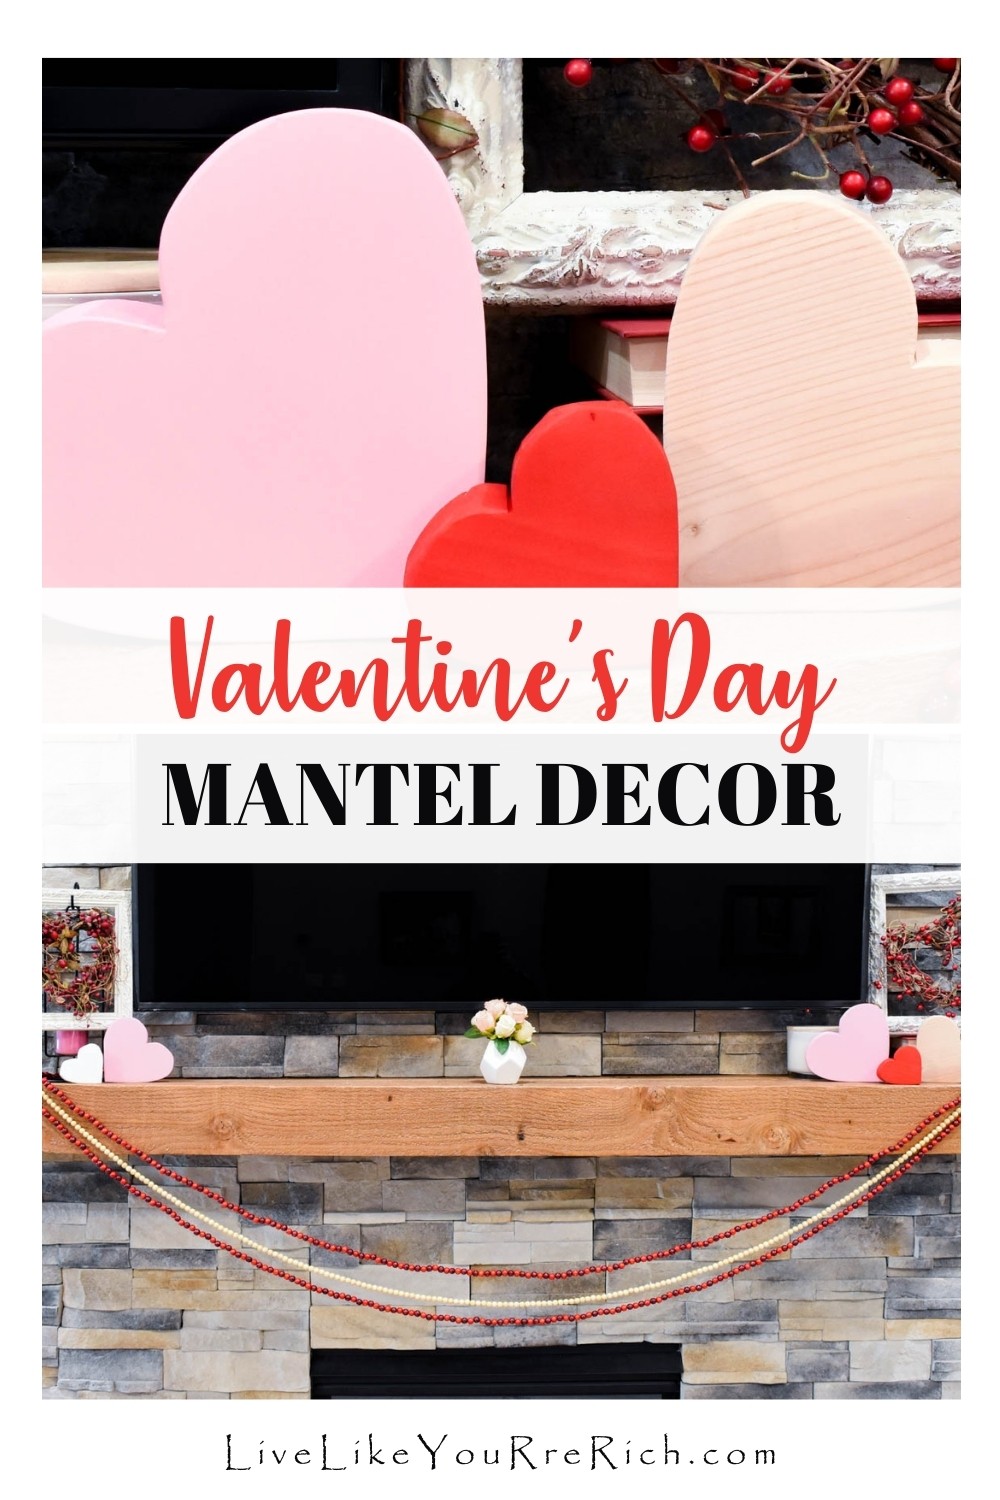 This Valentine’s Day Mantel Decor is styled in a shabby chic decorating style. I think it turned out quite cute. Although I don’t often decorate shabby chic, I think it is a super cute decor style. 